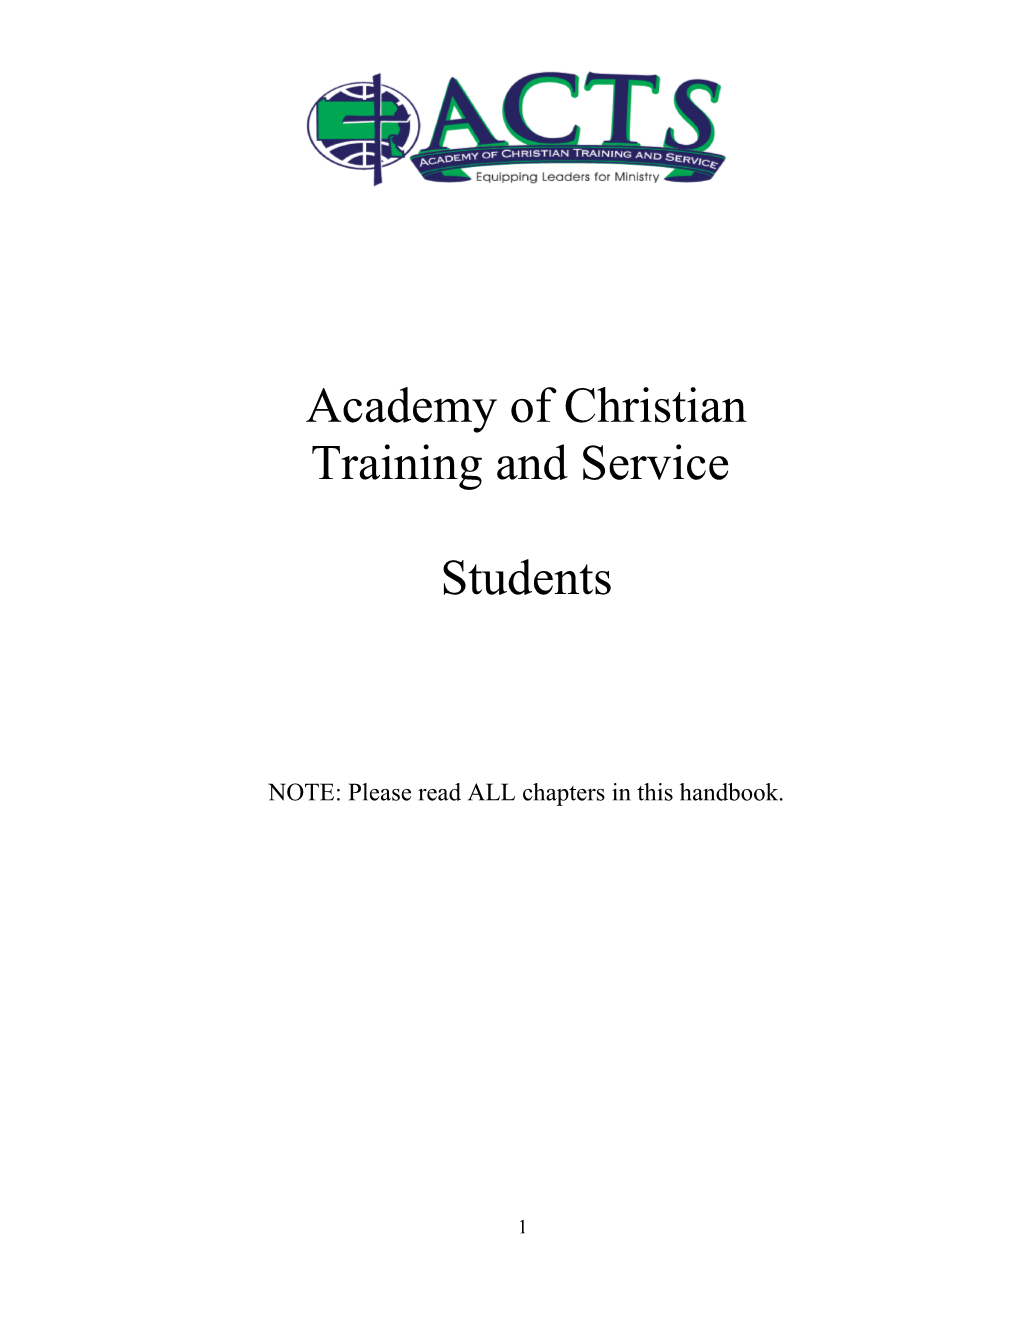 Academy of Christian Training and Service